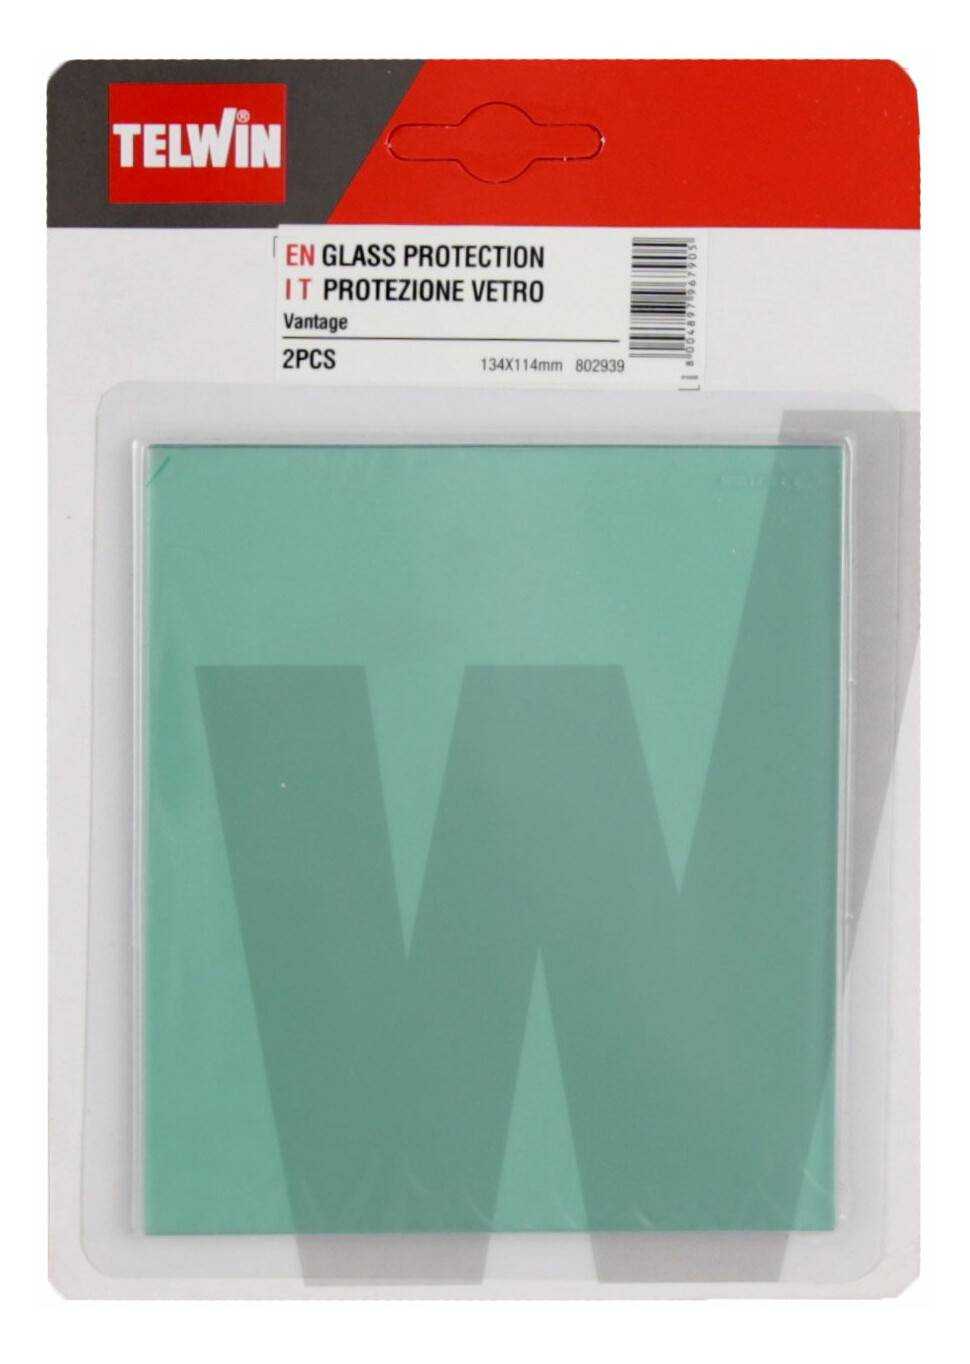 PROTECTION GLASS MASK TELWIN VANTAGE GREY XXL AND RED XL 2 UNITS